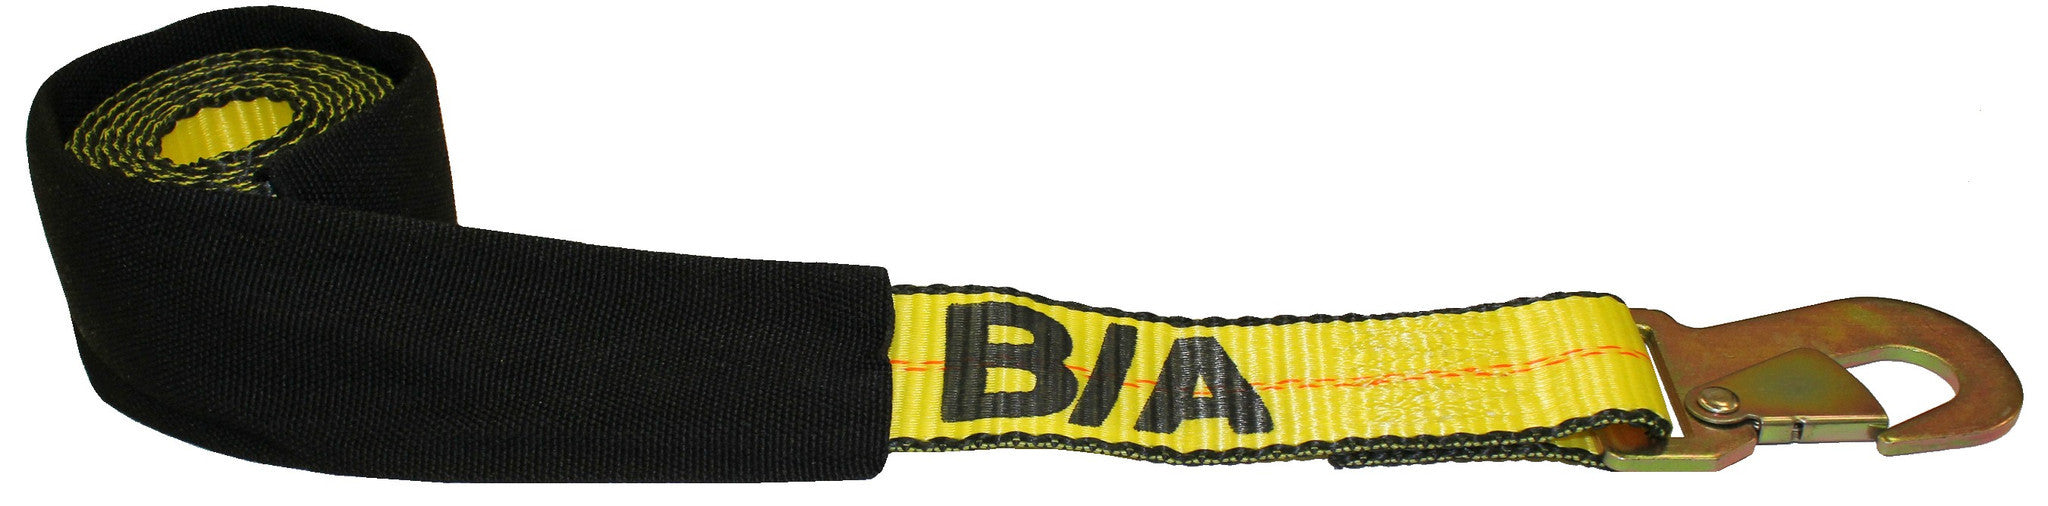 2 x 8' Tow Strap with Flat Snap Hook WLL 3330 LBS